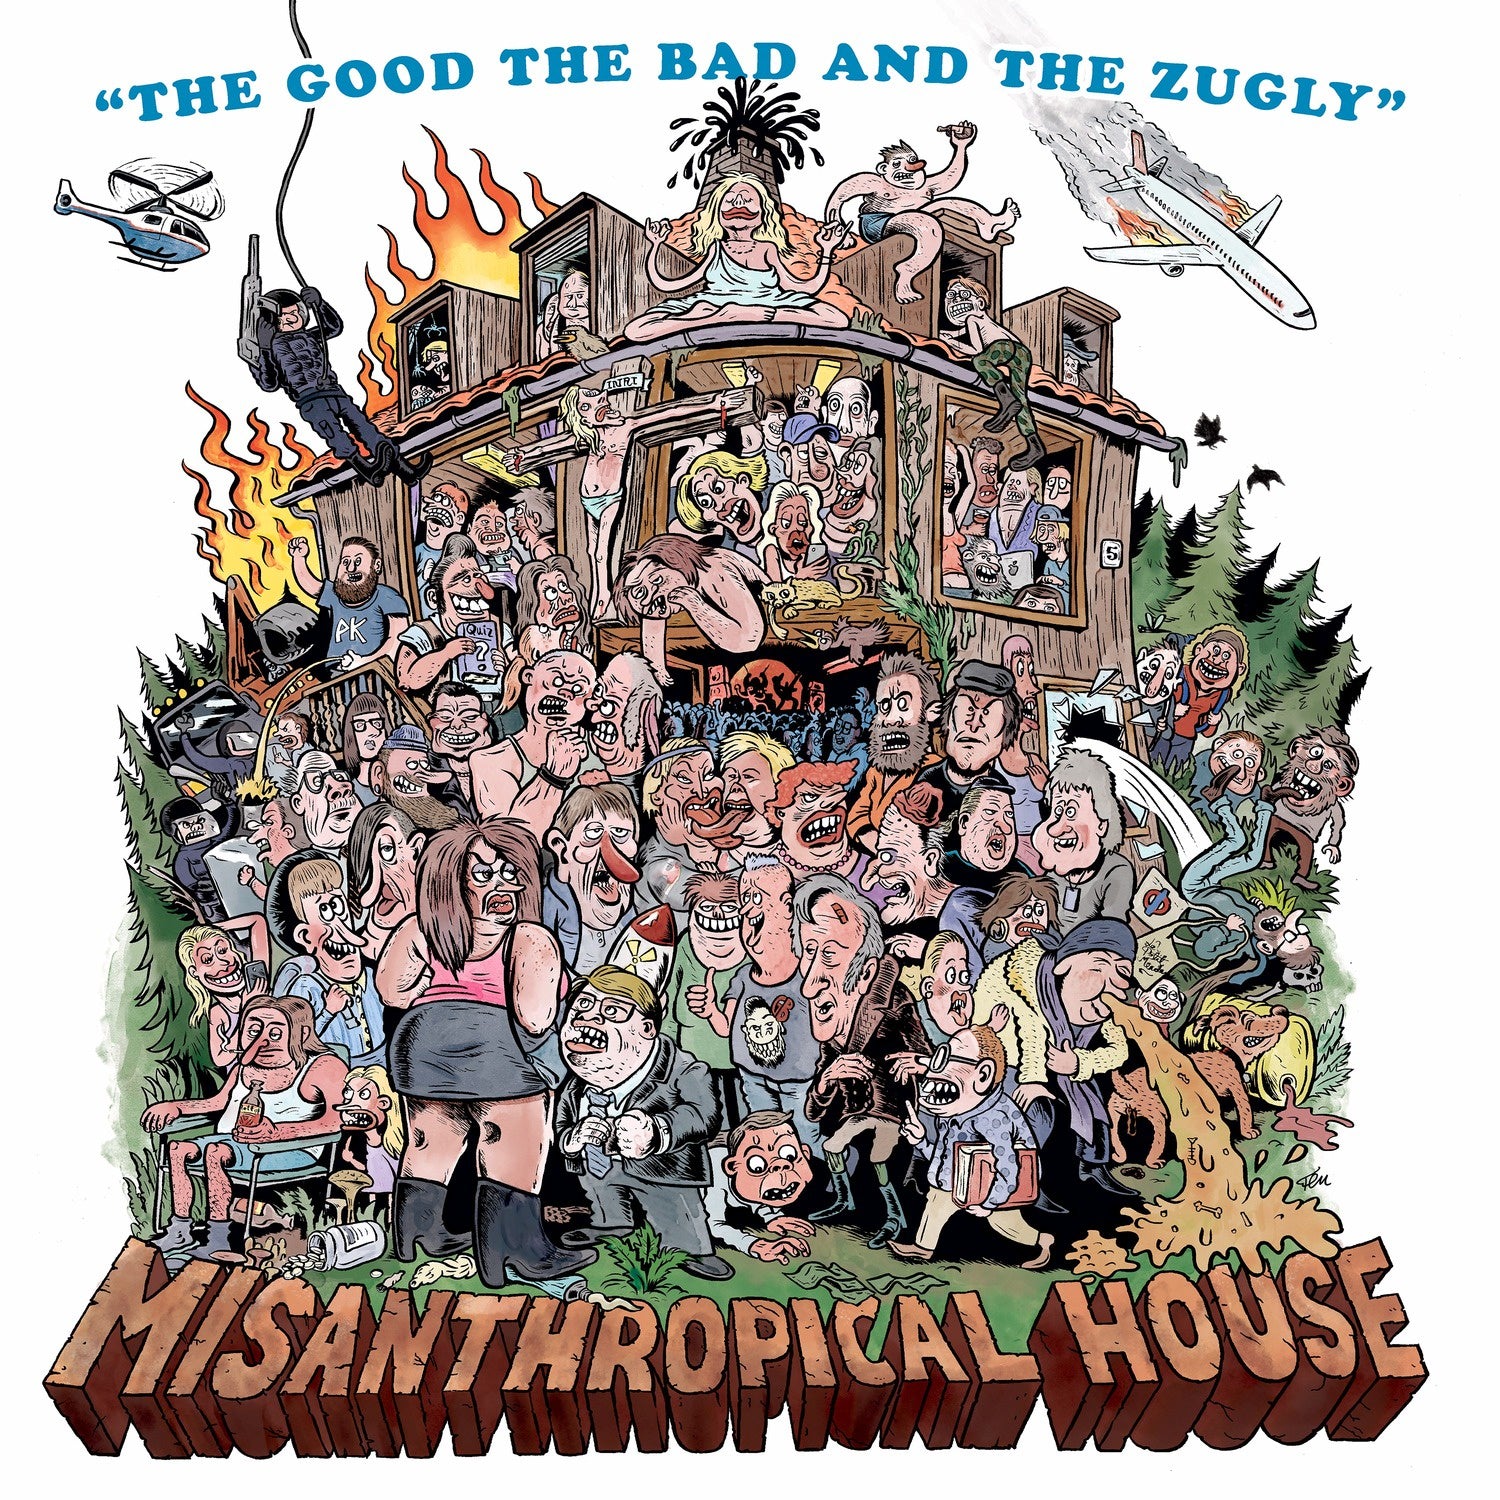 The Good The Bad And The Zugly ‎– Misanthropical House - New Lp Record 2018 Fysisk Format Norway Import Green Vinyl - Punk Rock / Hardcore